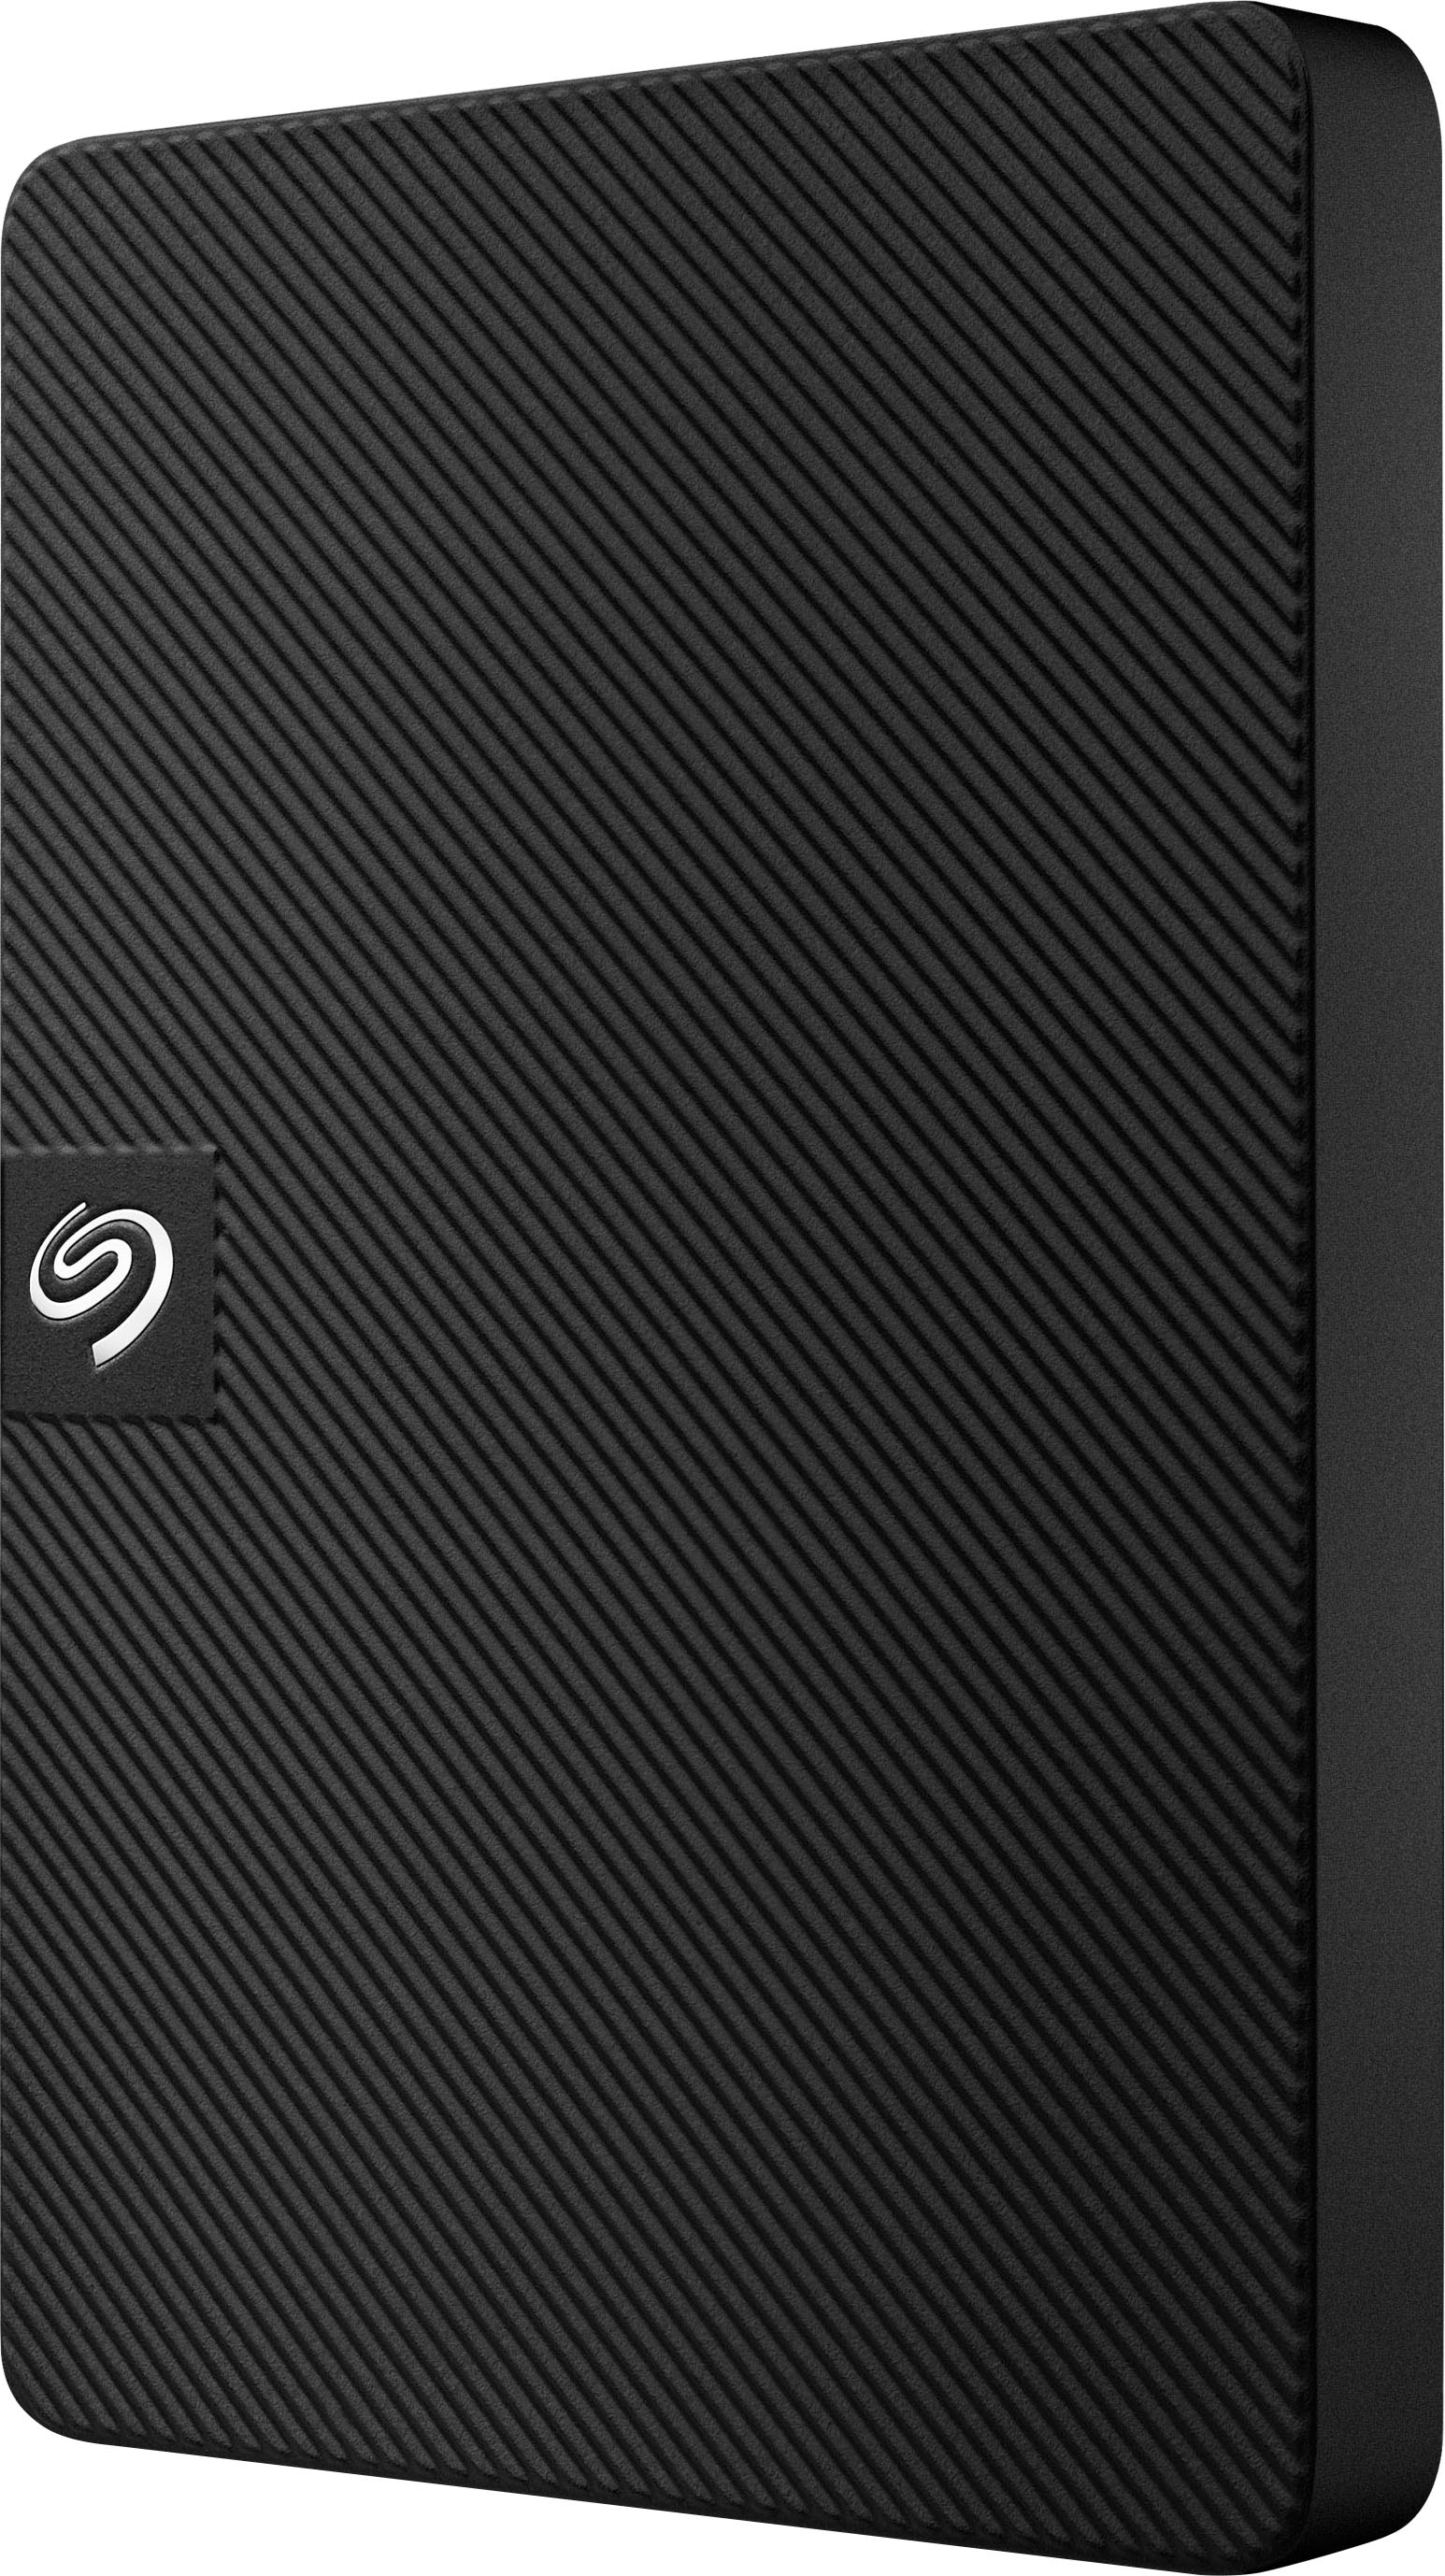 Seagate externe HDD-Festplatte »Expansion Portable 2TB«, 2,5 Zoll, Anschluss USB 3.0